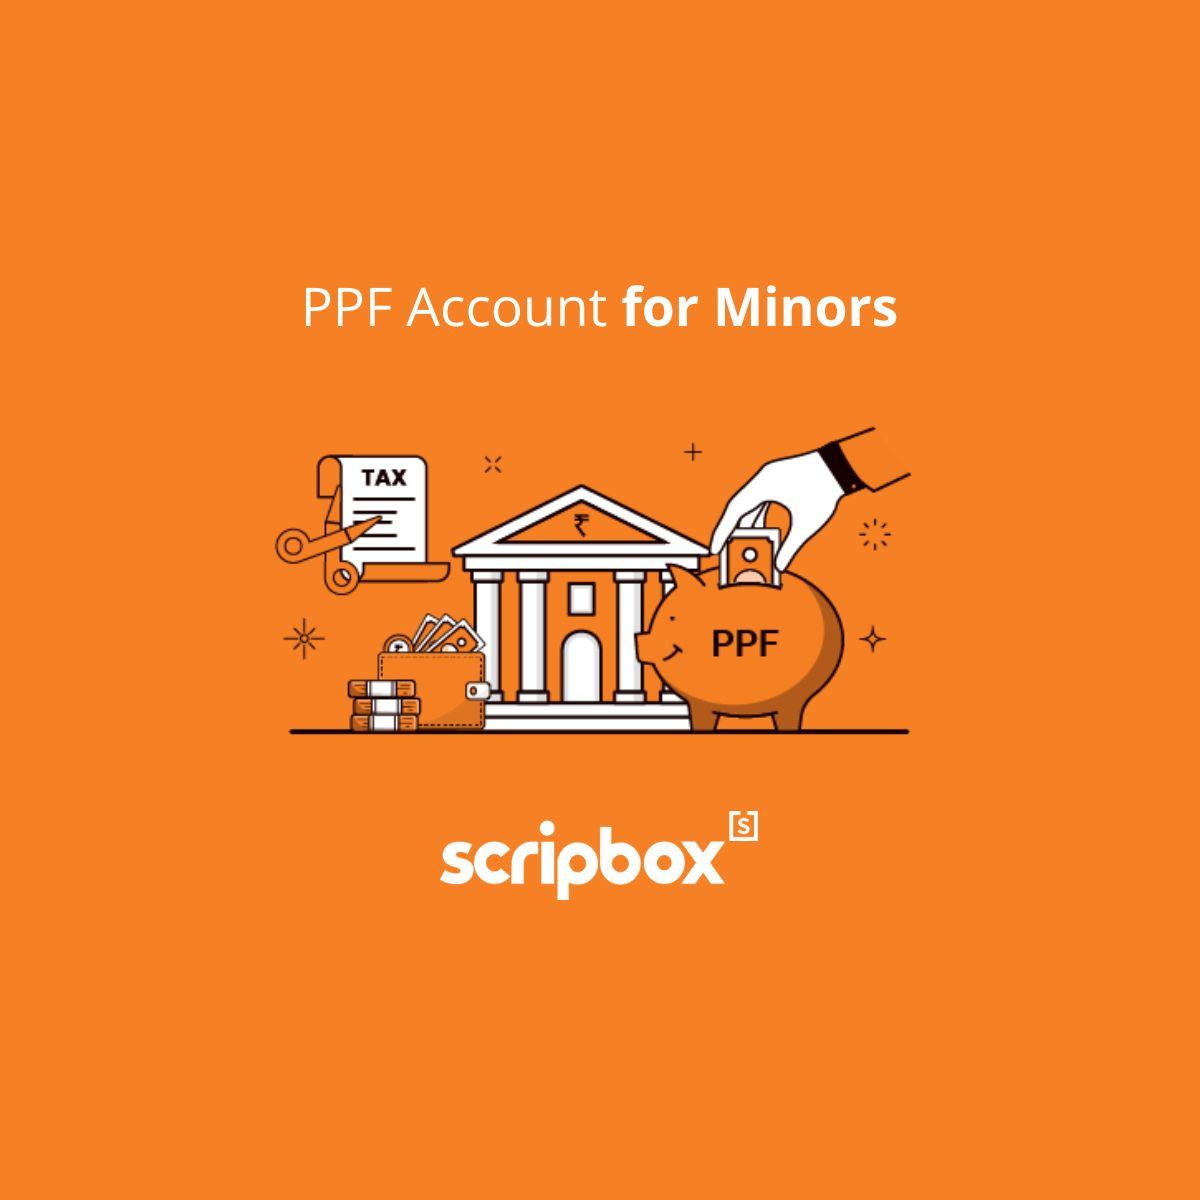 ppf account for minors